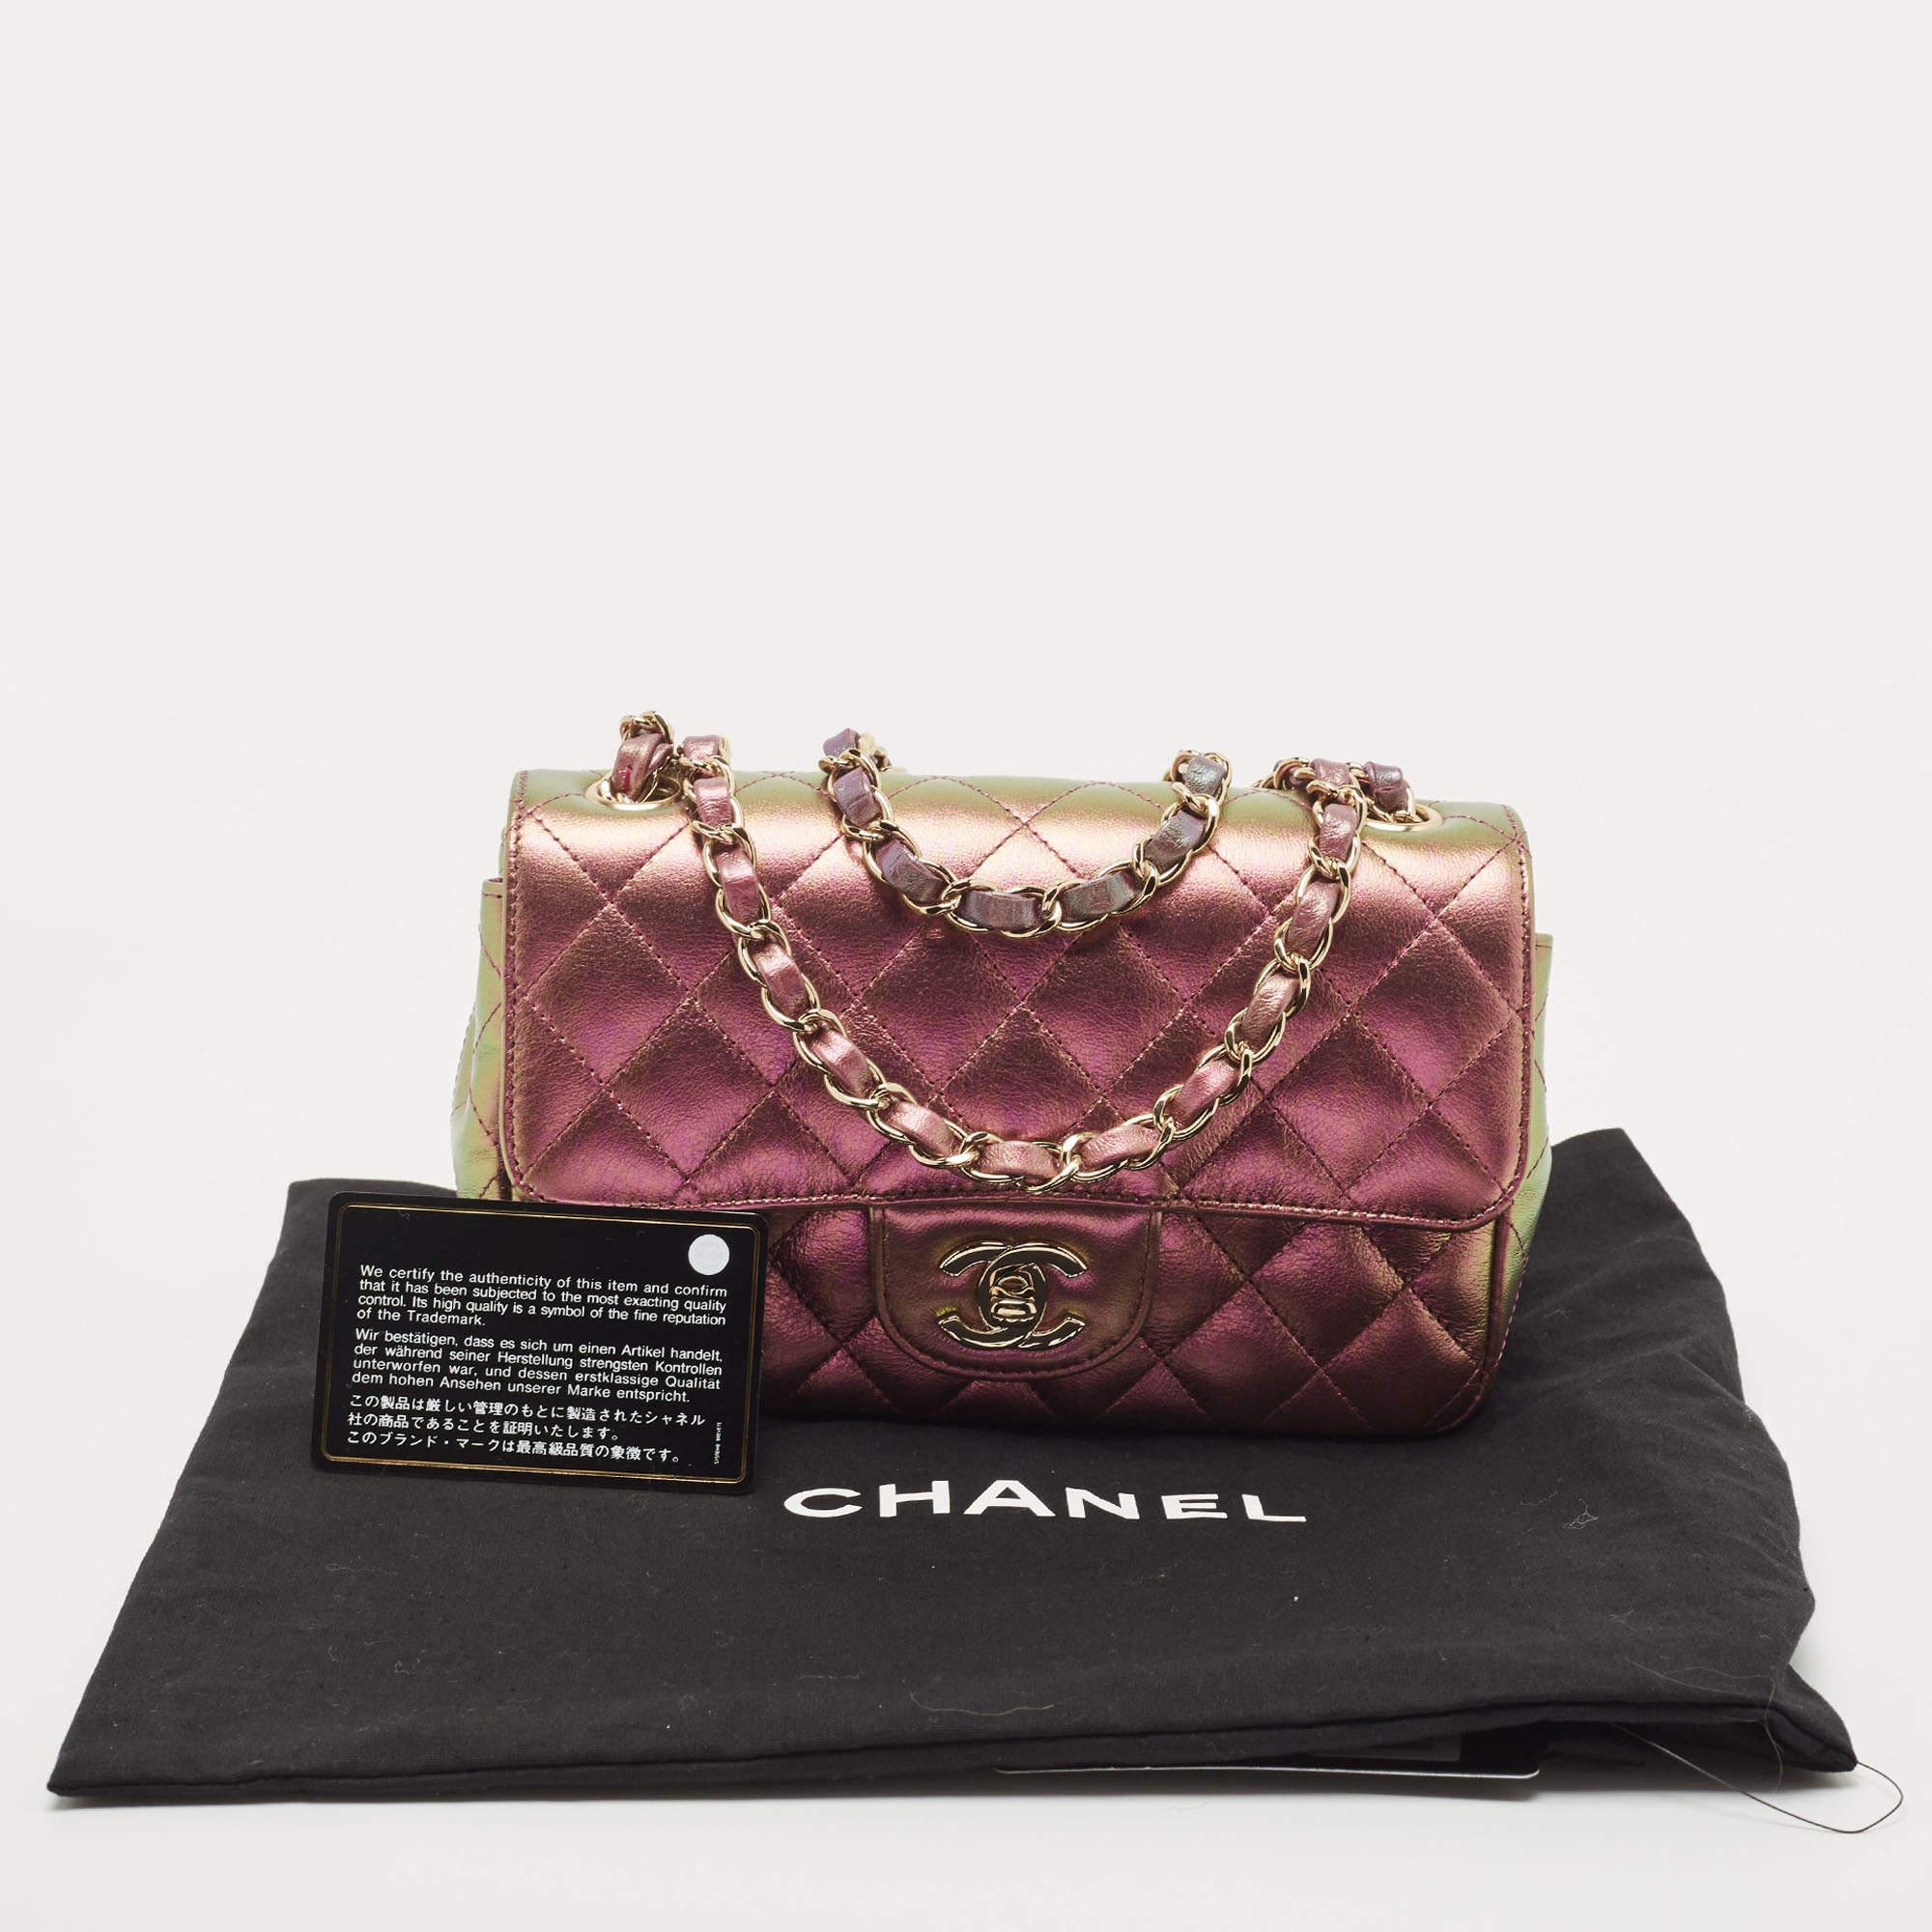 Chanel Iridescent Quilted Leather New Mini Classic Flap Bag 8